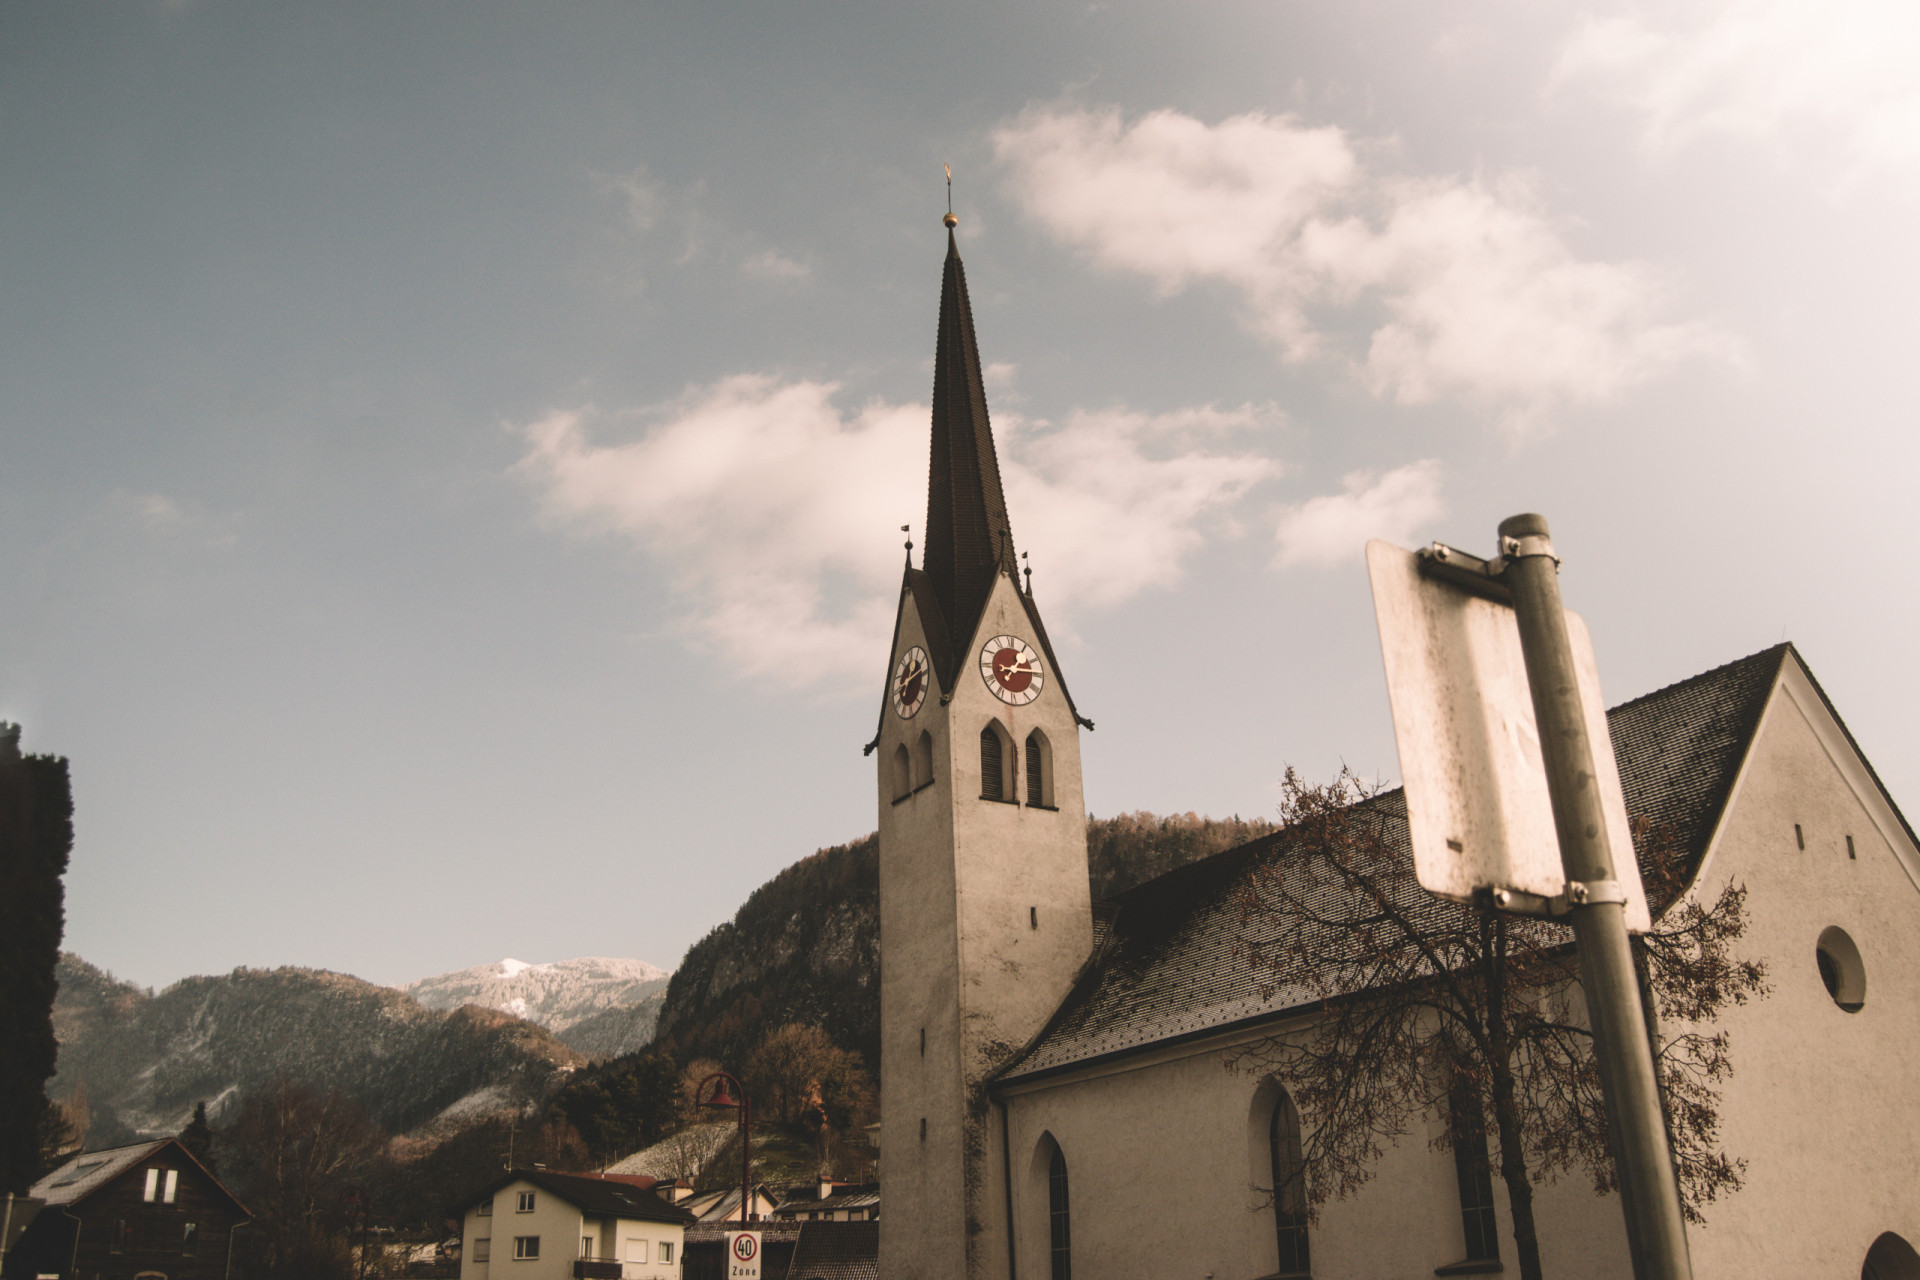 <p>Owing to Liechtenstein’s small size, you would be able to drive a mere eight minutes before setting foot in Austria, the 17th country on the list. Although you may be tempted to stop in the town of Götzis and try one of Austria’s famous schnitzel, you must resist! The next country awaits.</p><p><a href="https://www.msn.com/en-us/community/channel/vid-7xx8mnucu55yw63we9va2gwr7uihbxwc68fxqp25x6tg4ftibpra?cvid=94631541bc0f4f89bfd59158d696ad7e">Follow us and access great exclusive content every day</a></p>